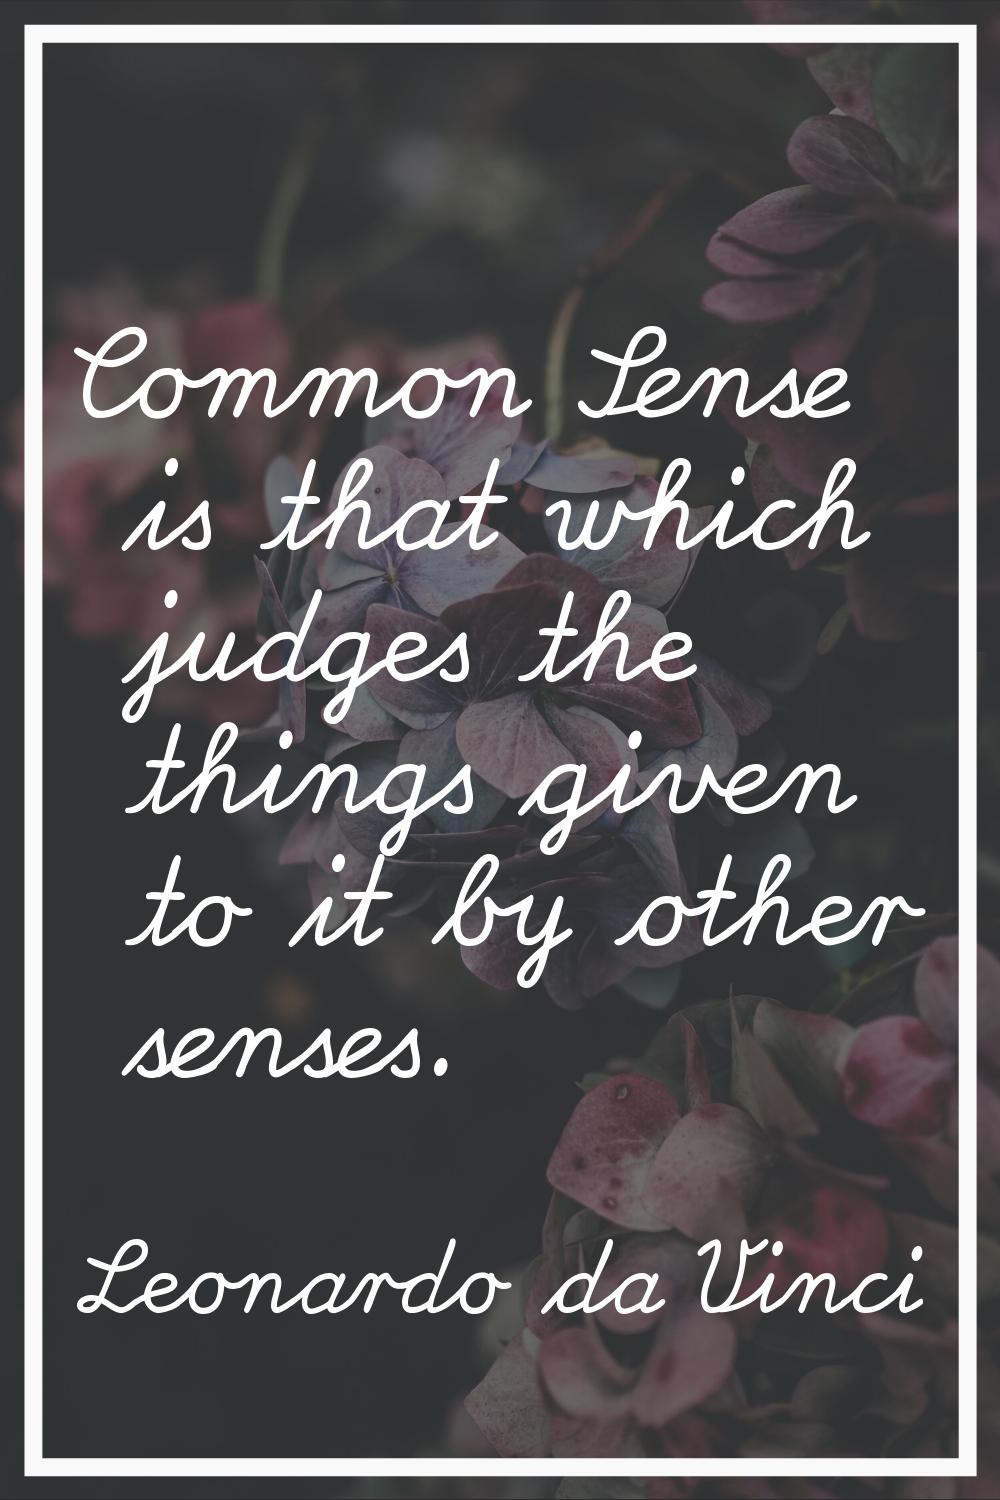 Common Sense is that which judges the things given to it by other senses.